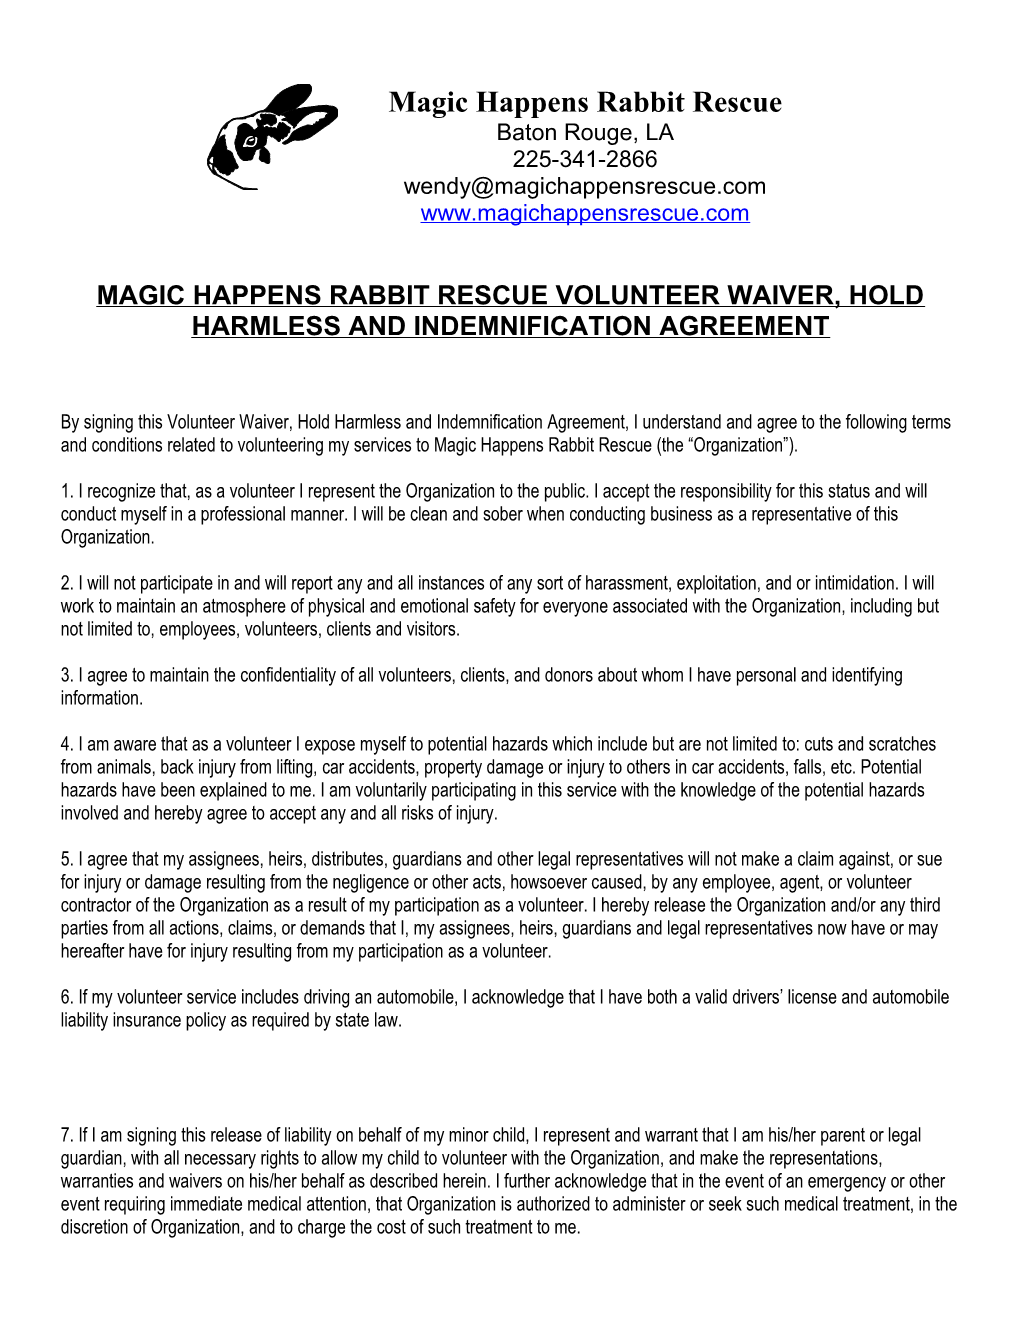 Magic Happens Rabbit Rescue Volunteer Waiver, Hold Harmless and Indemnification Agreement